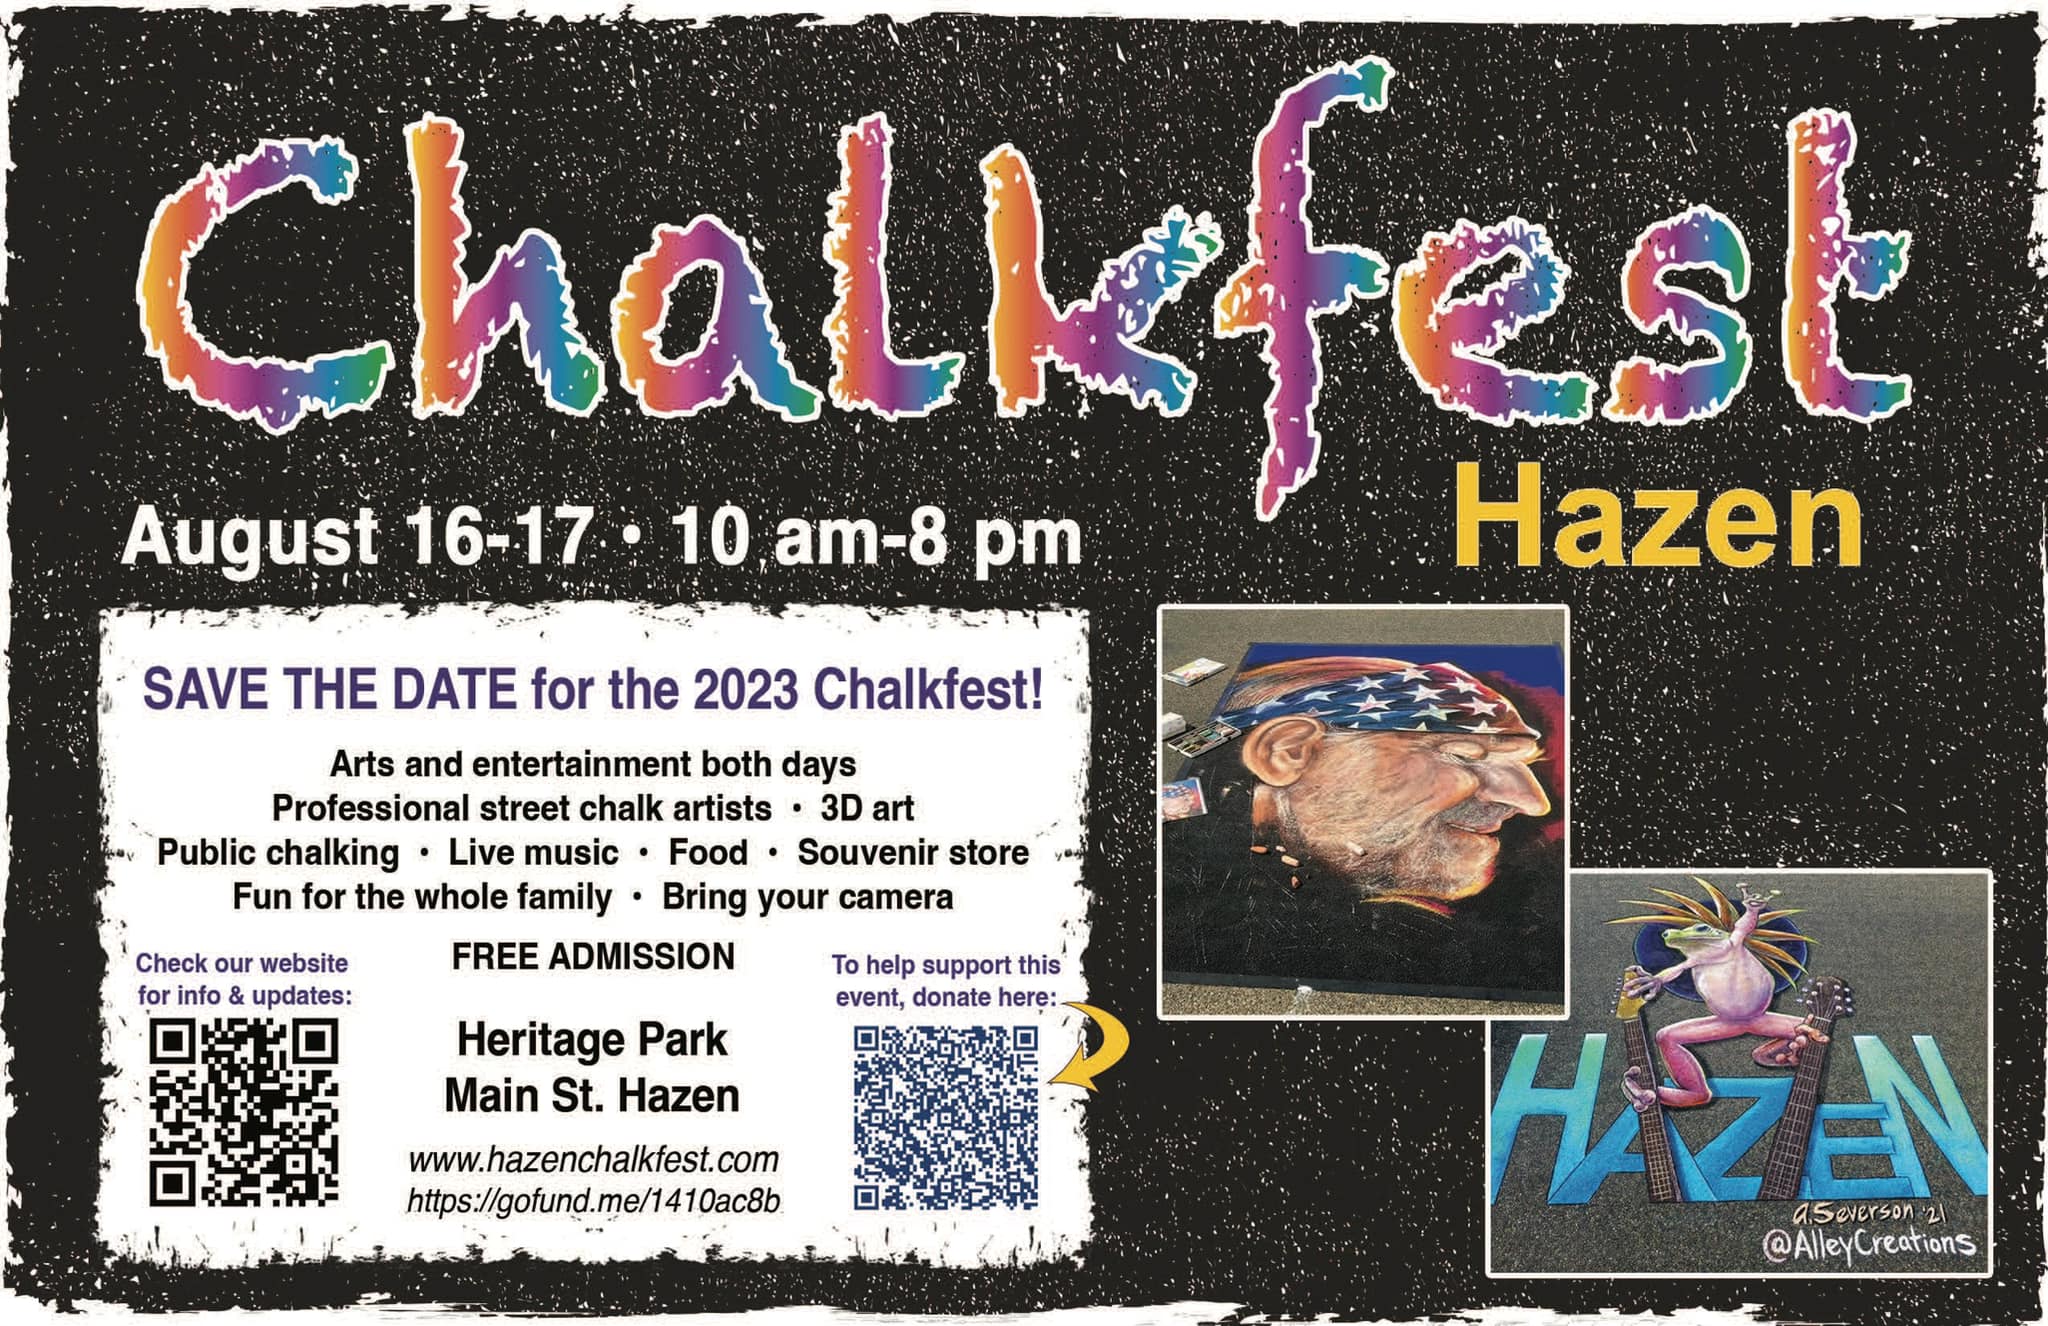 Event Promo Photo For Chalkfest